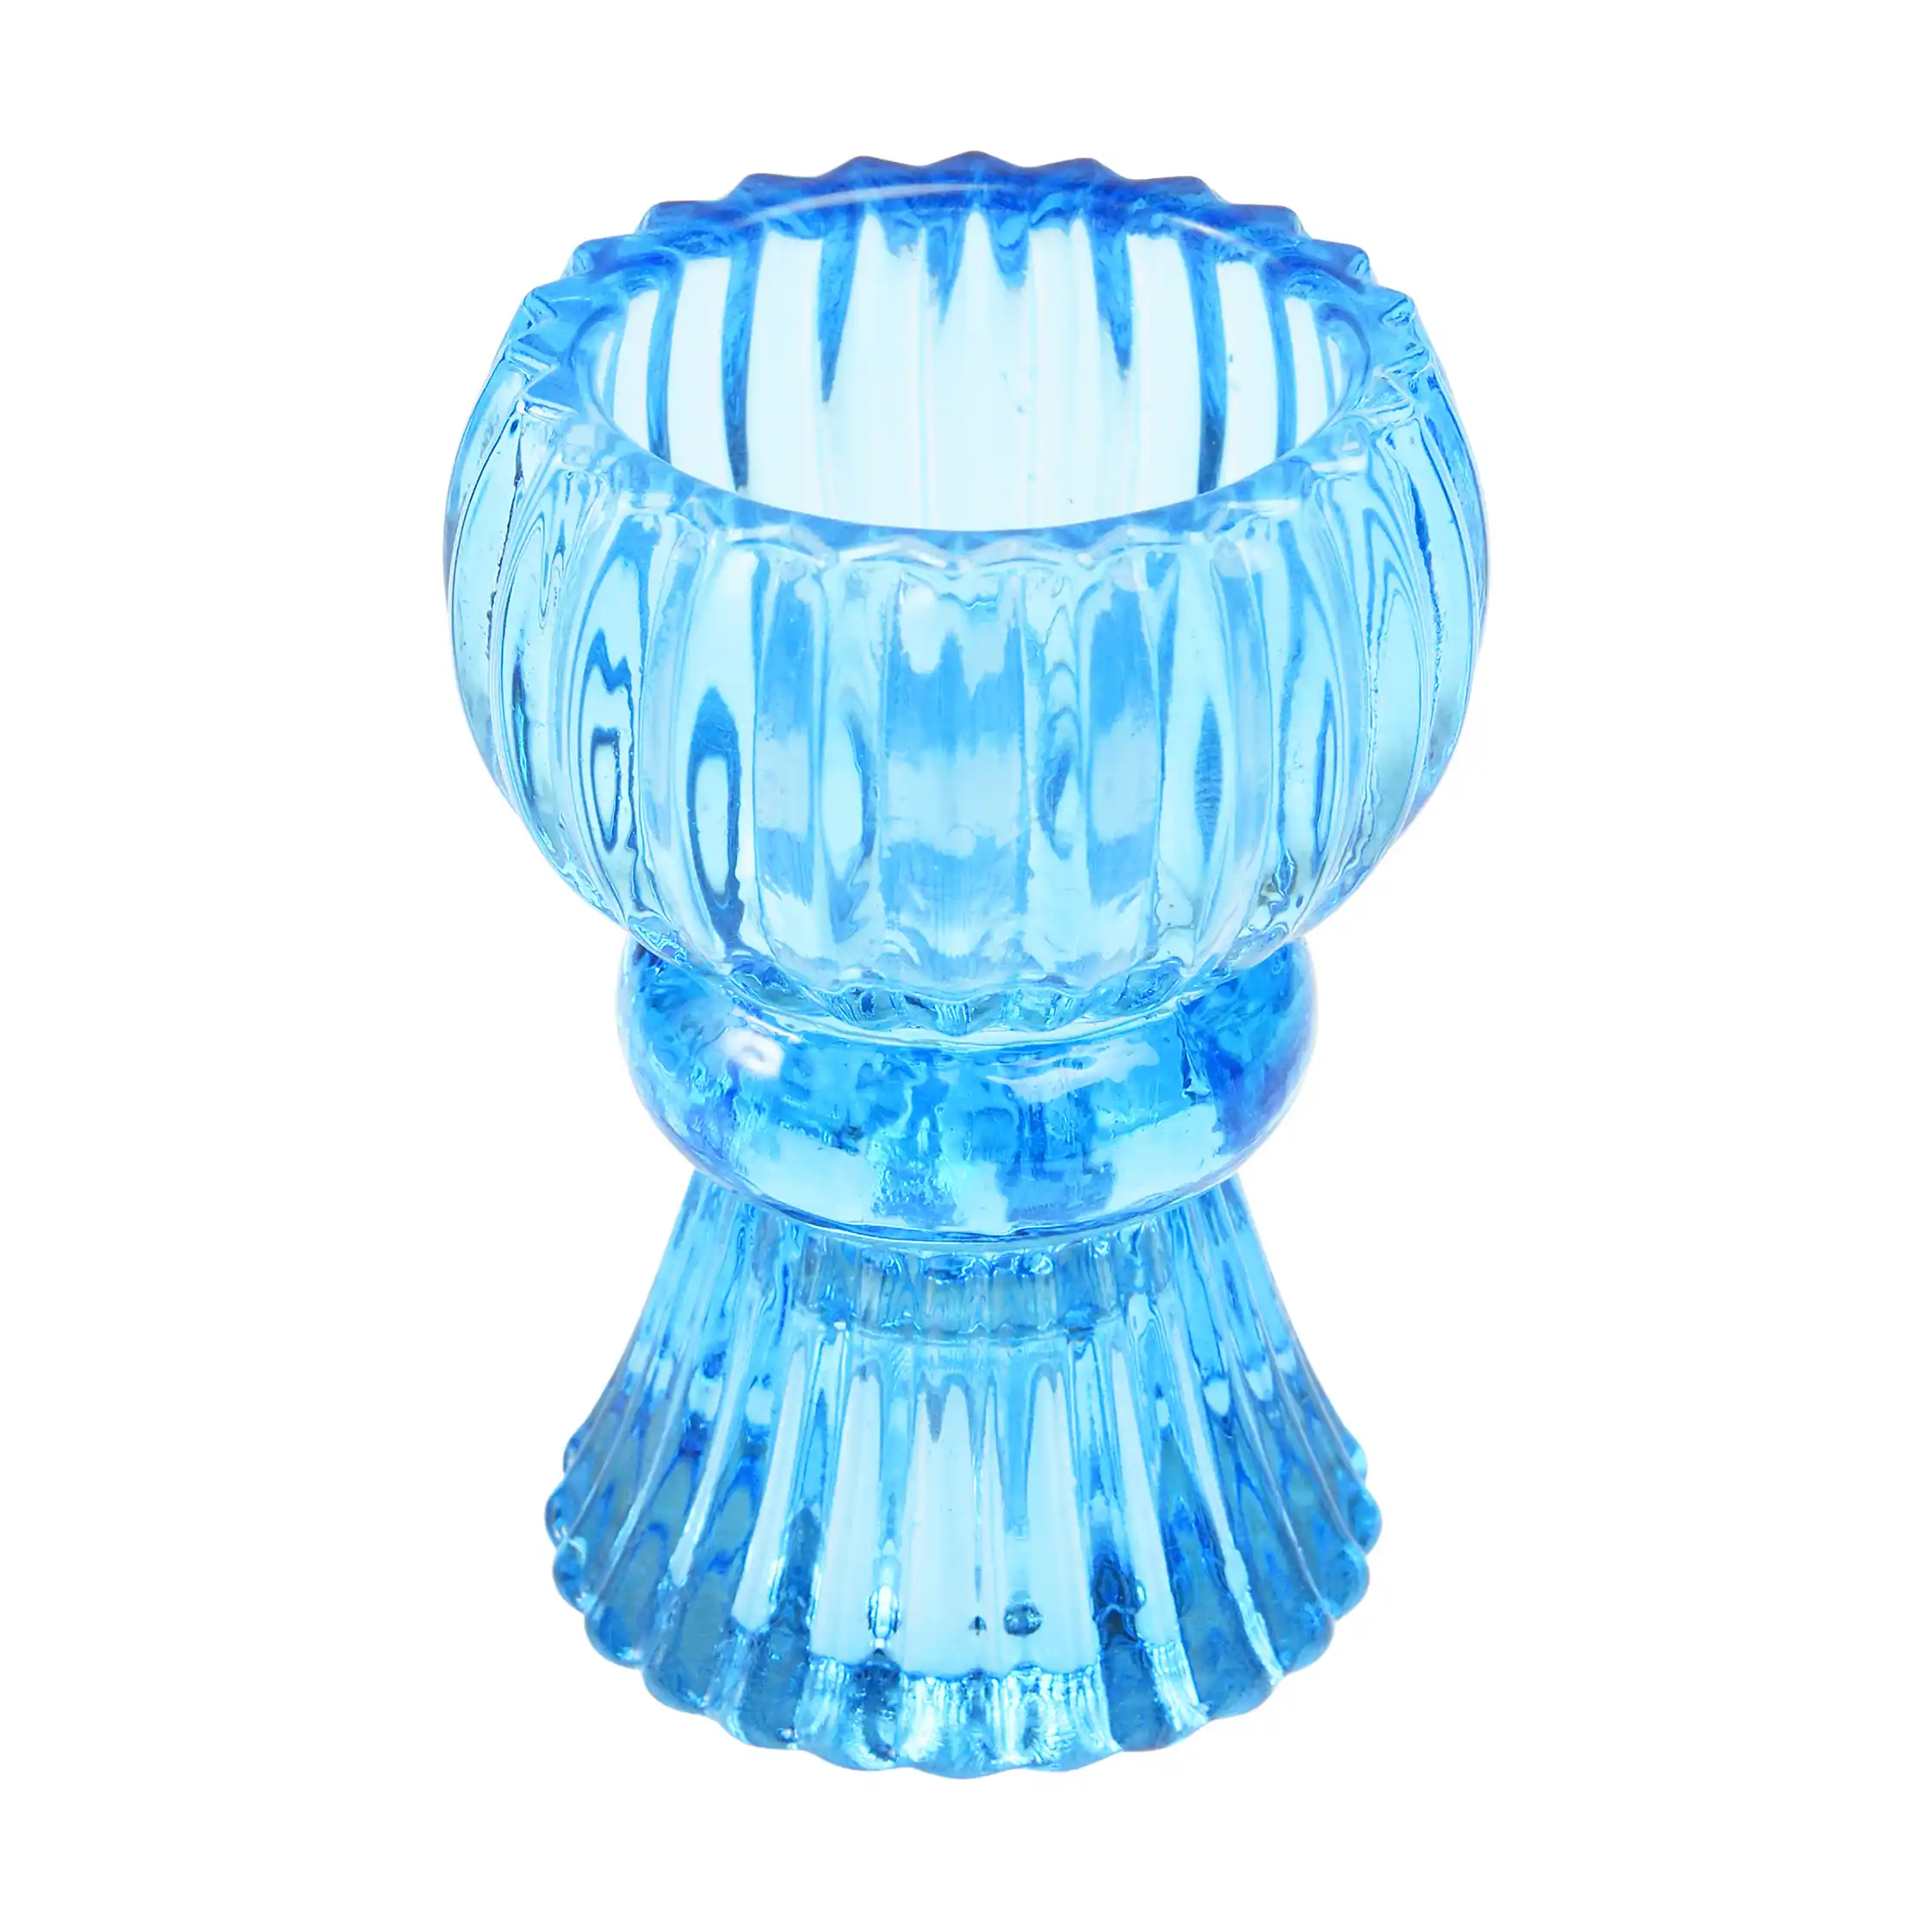 double ended glass candle holder - blue